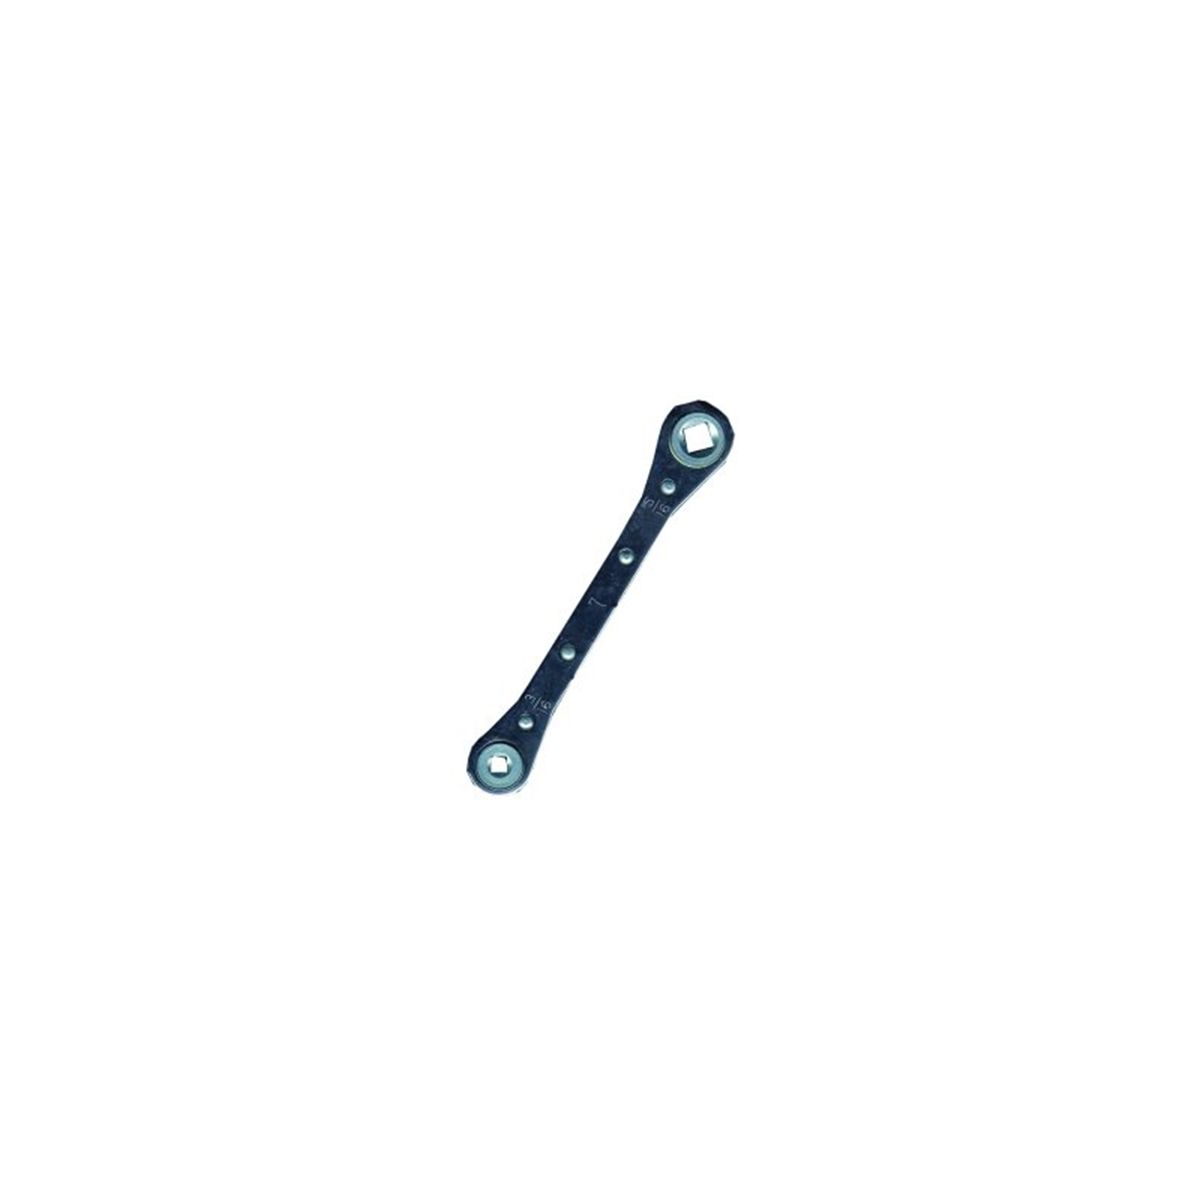 A/C Ratchet Wrench - 4-Sq